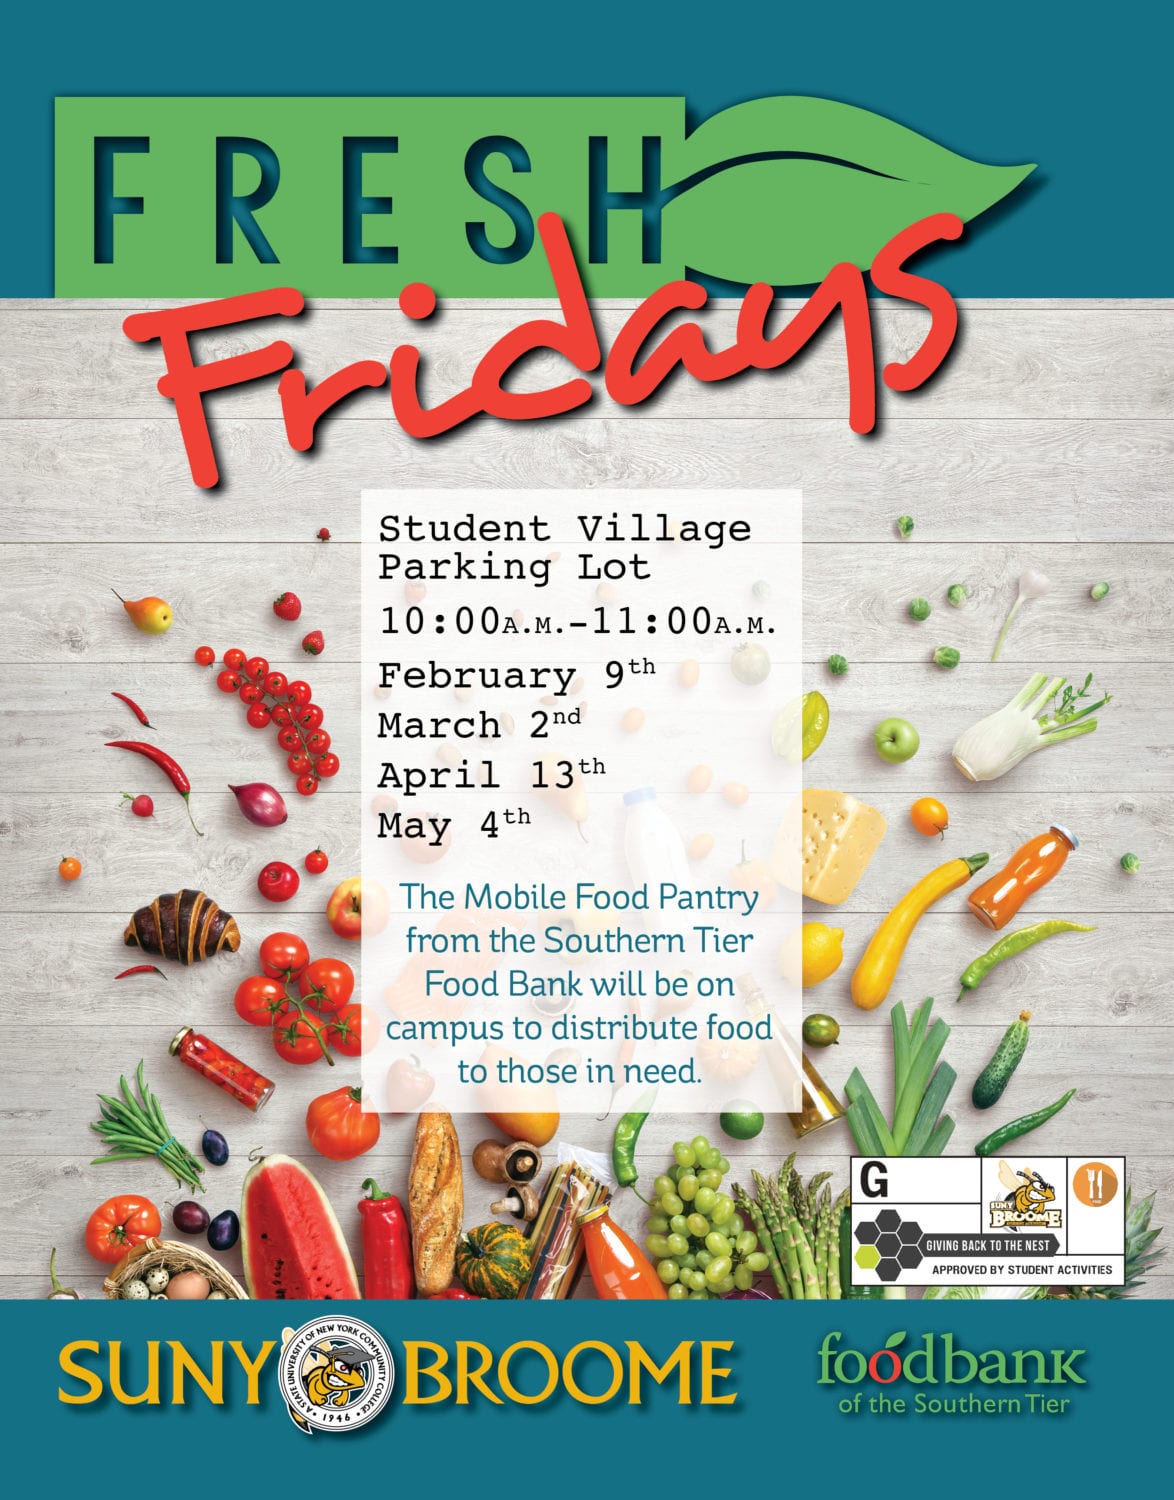 Need food? Fresh Fridays comes to campus Feb. 9, March 2, April 13 and May 4